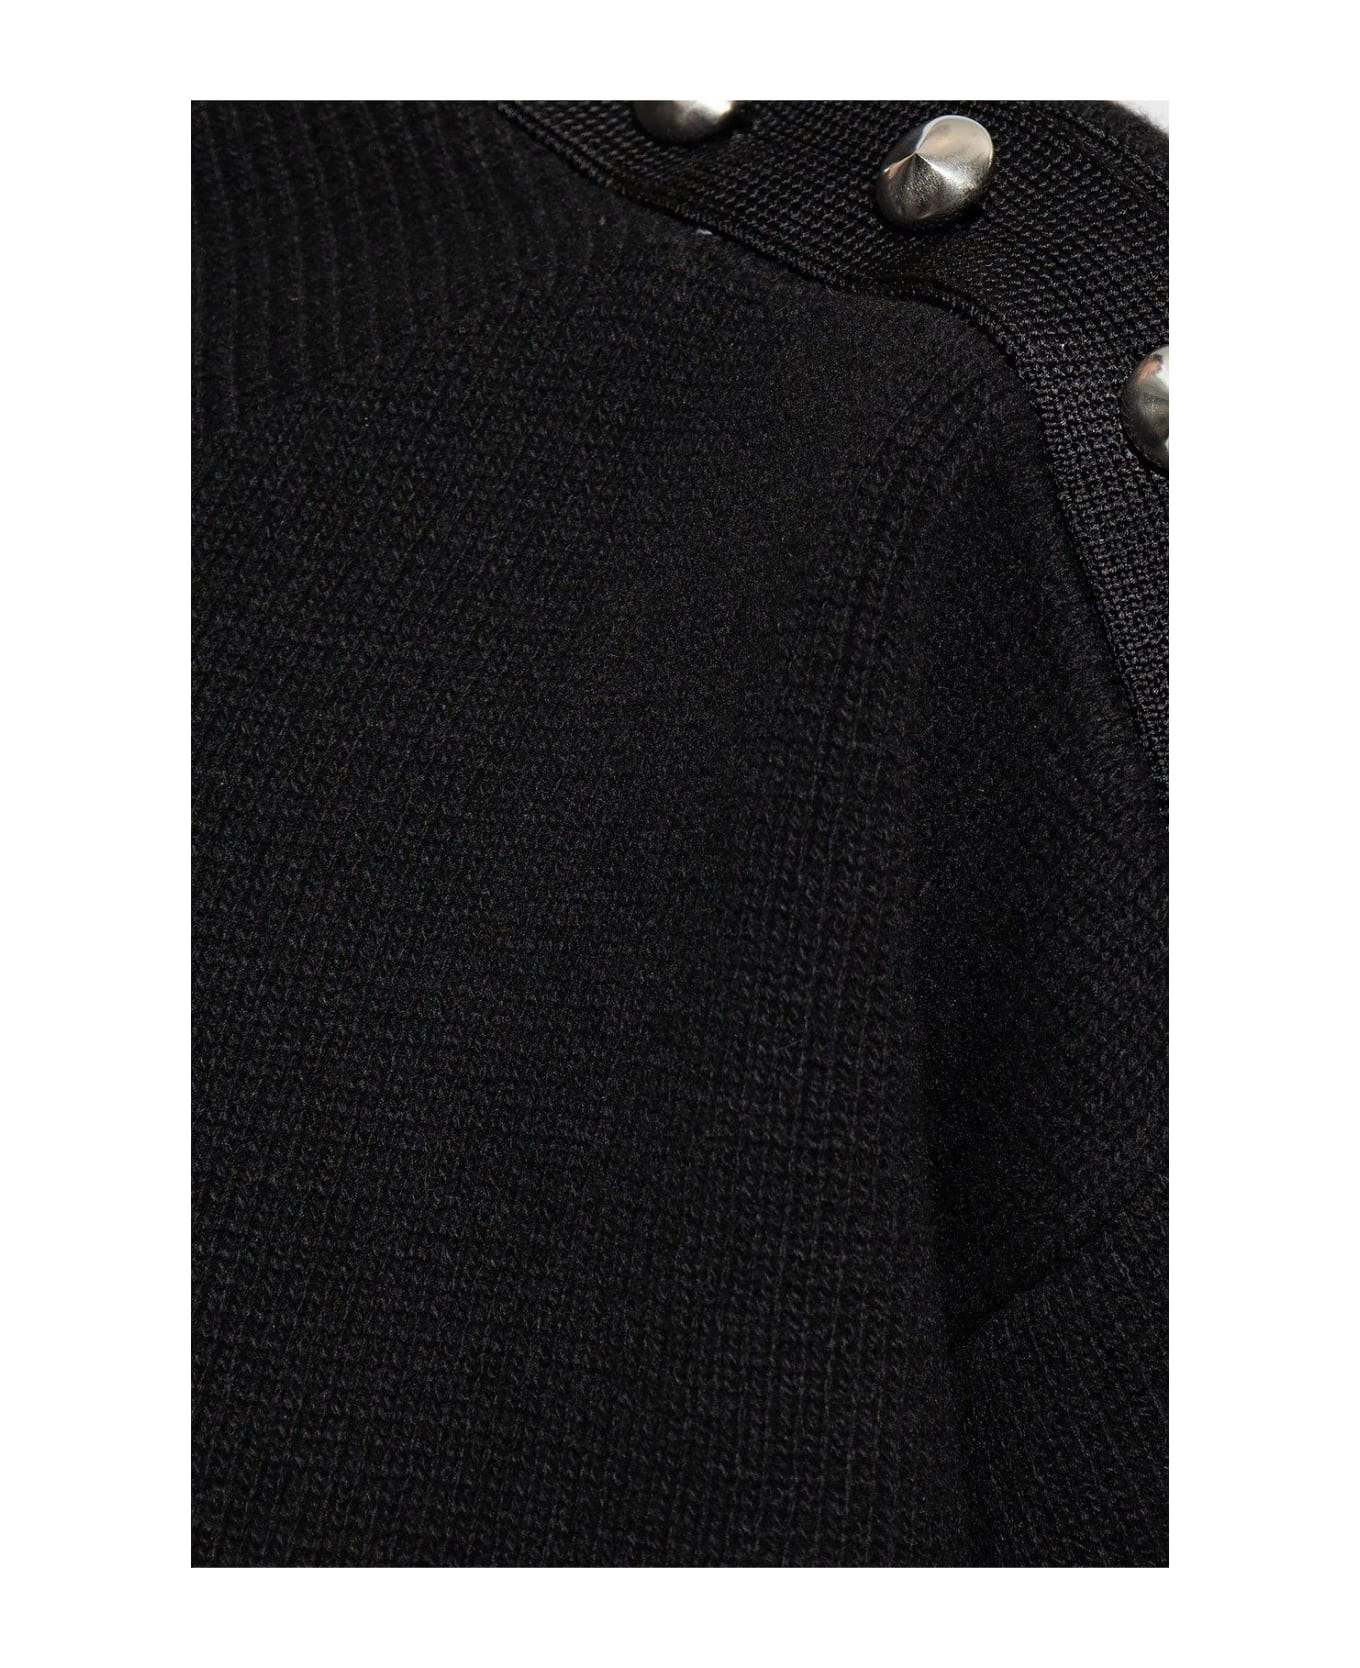 Ferragamo Button Detailed Knitted Sweater - BLACK